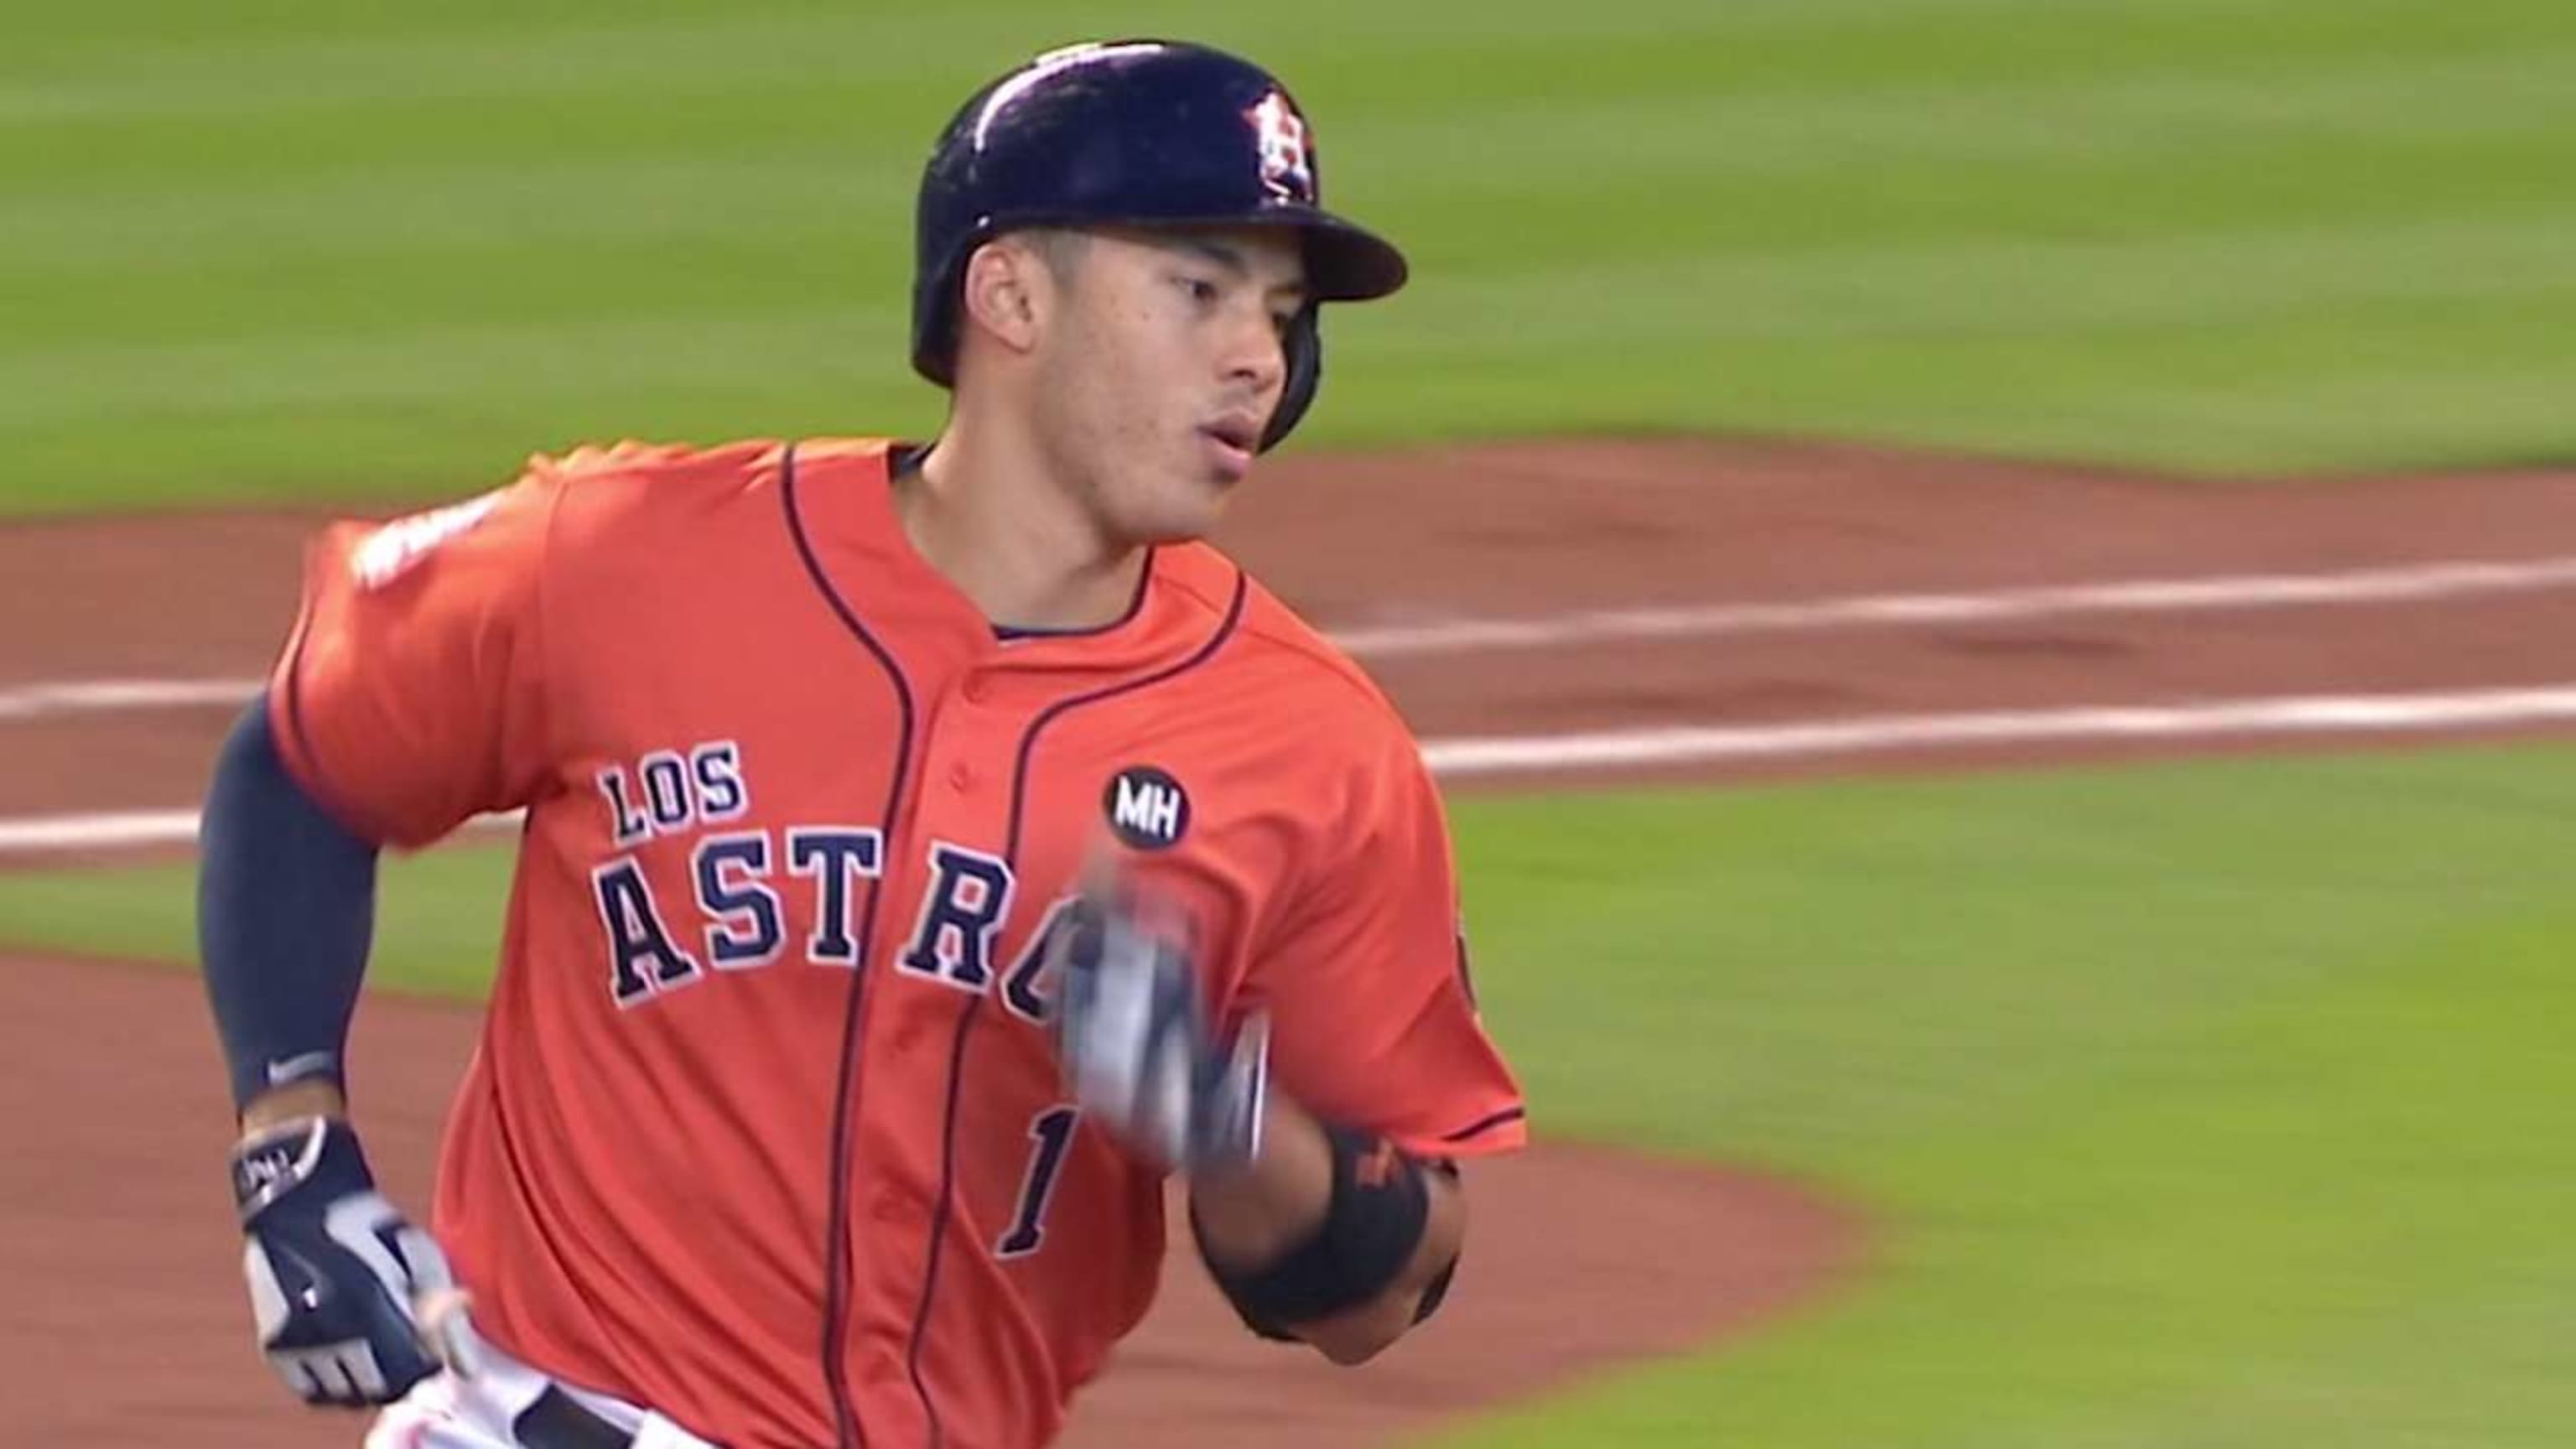 Great start ends in Rookie of Year award for Astros' Correa